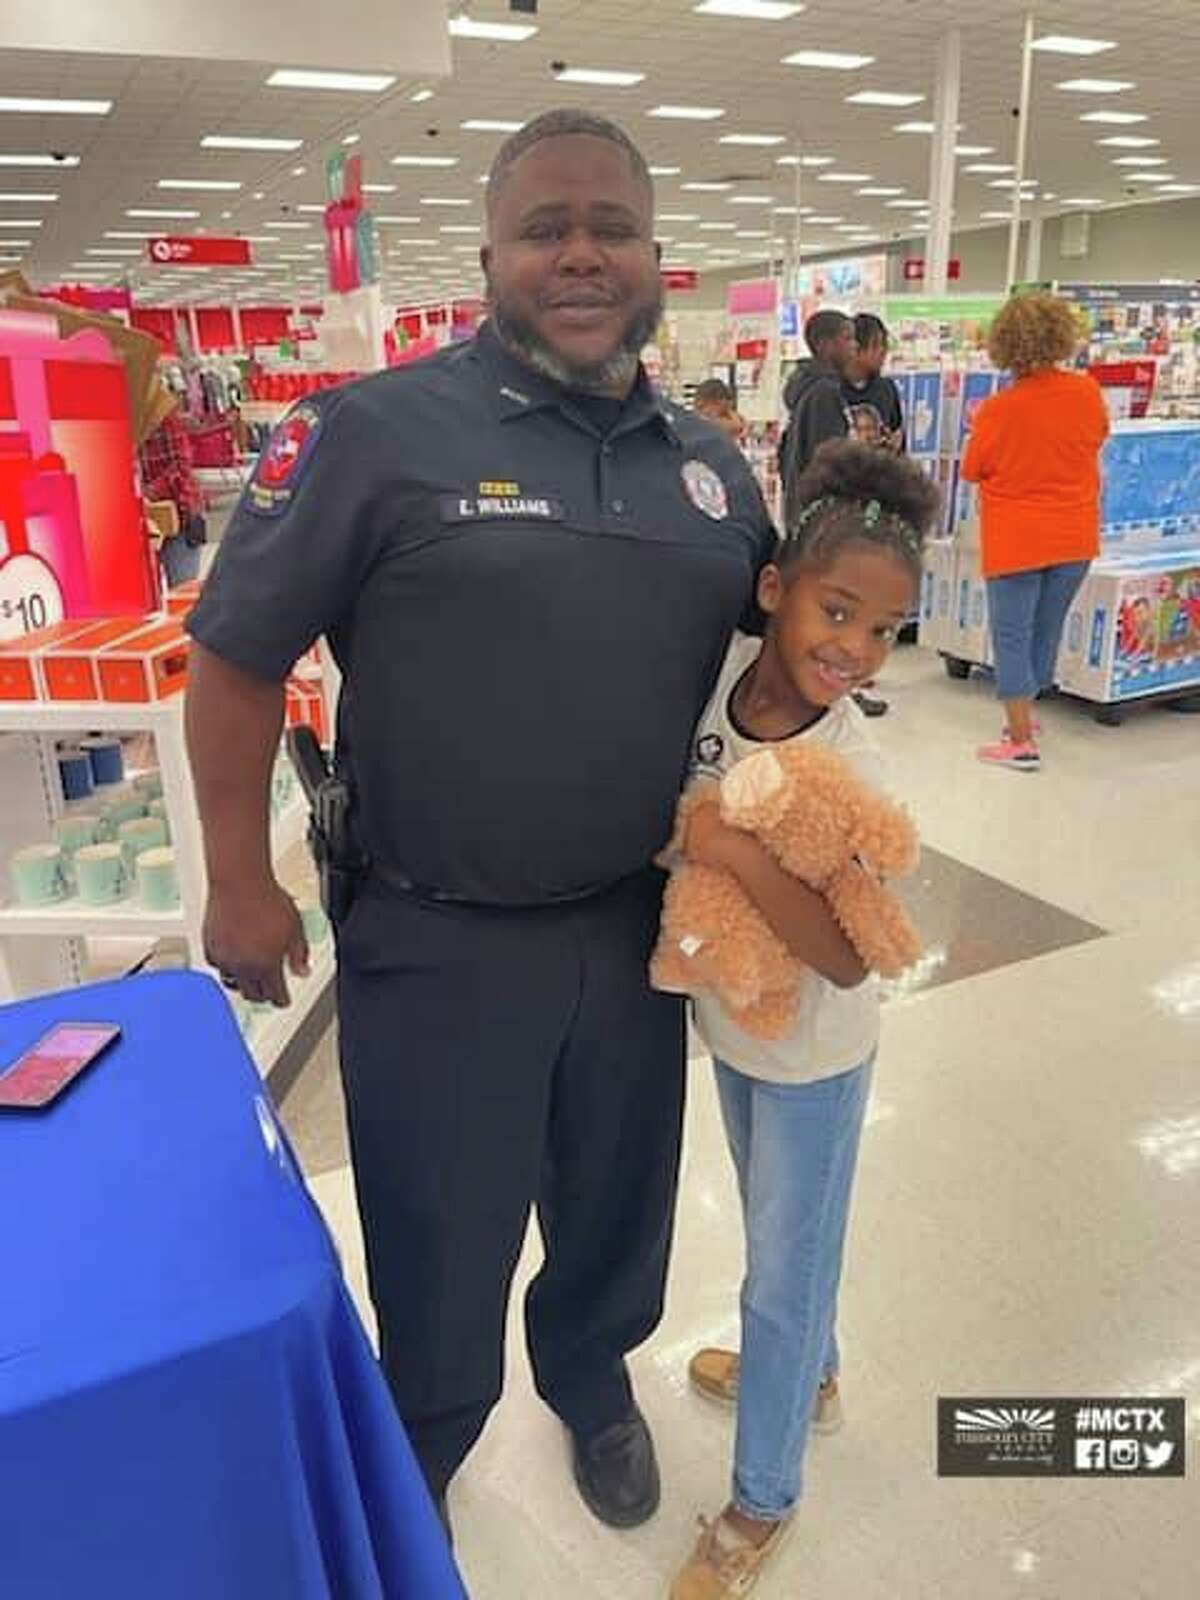 A police police officer poses with a child on Saturday, Dec. 18, at the annual Shop with a Cop event.